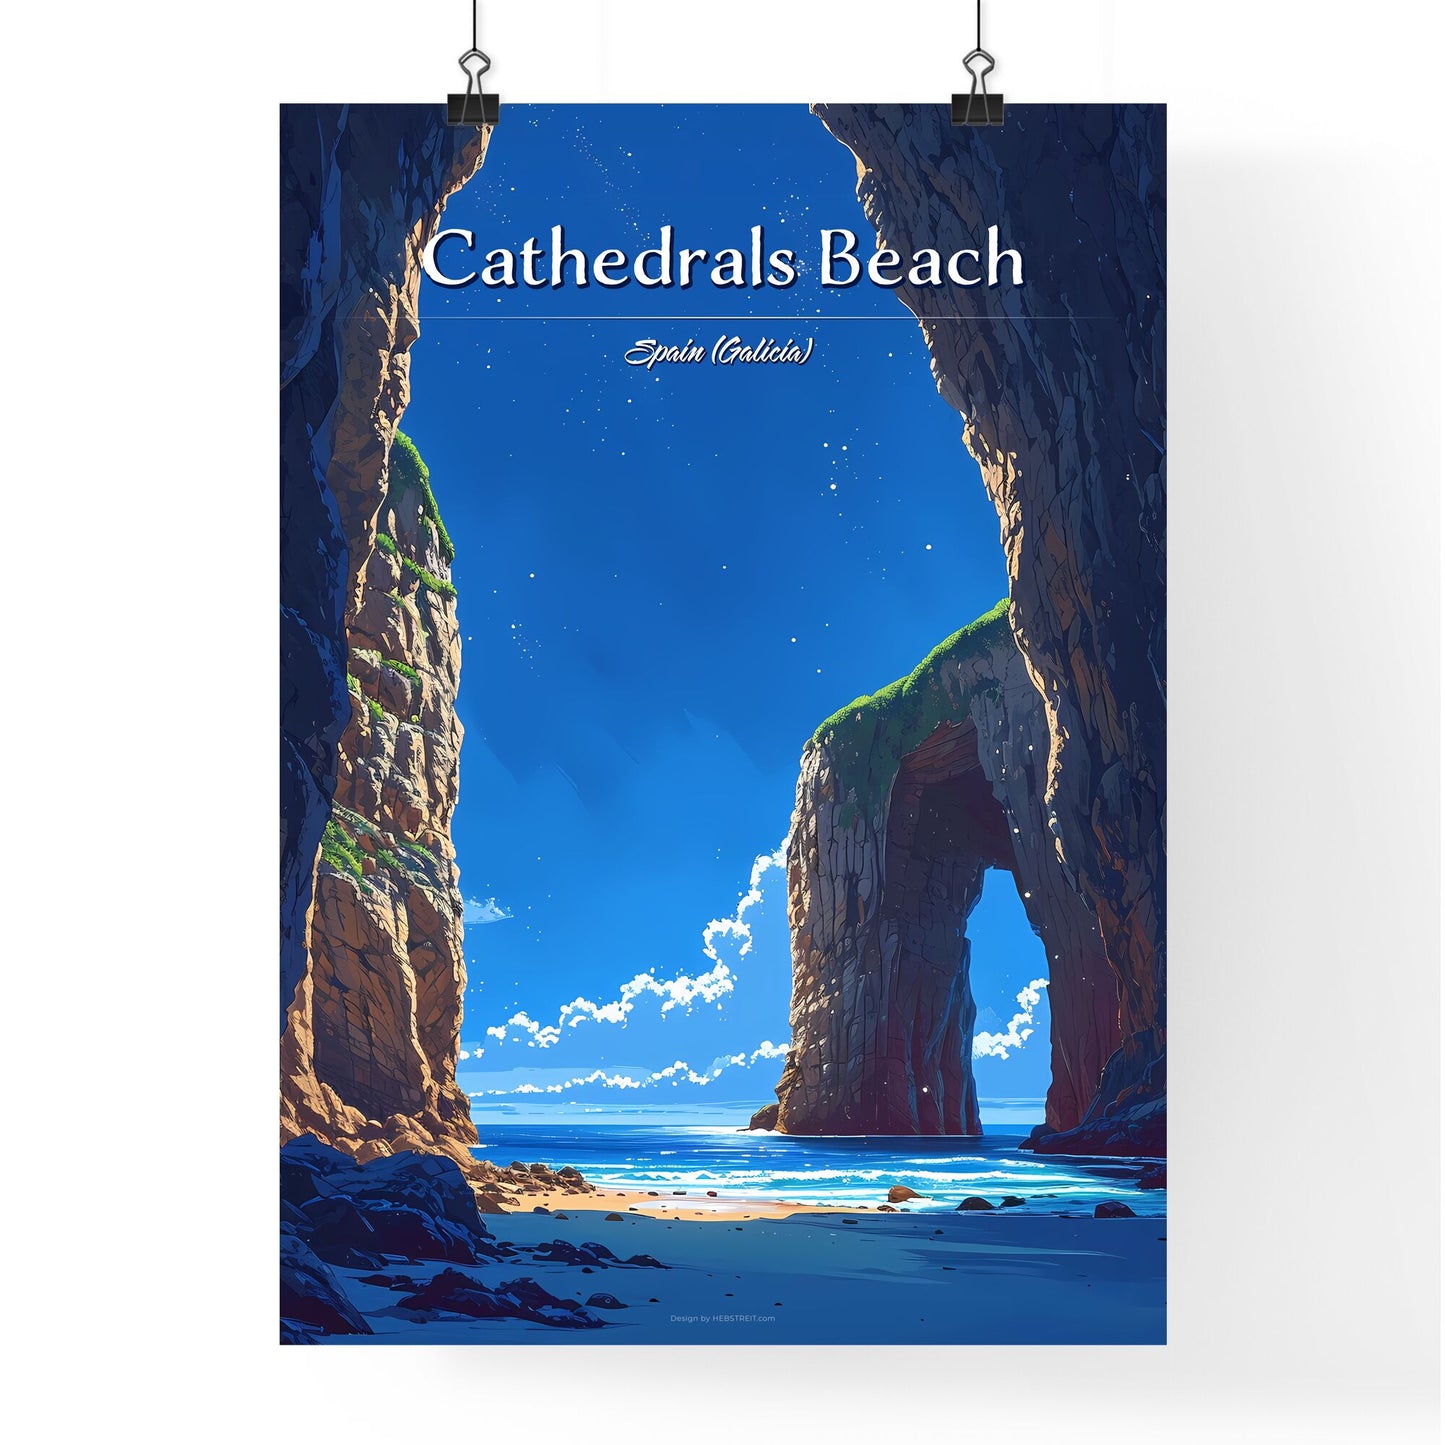 Cathedrals Beach, Spain (Galicia) - Art print of a rock formations on a beach Default Title